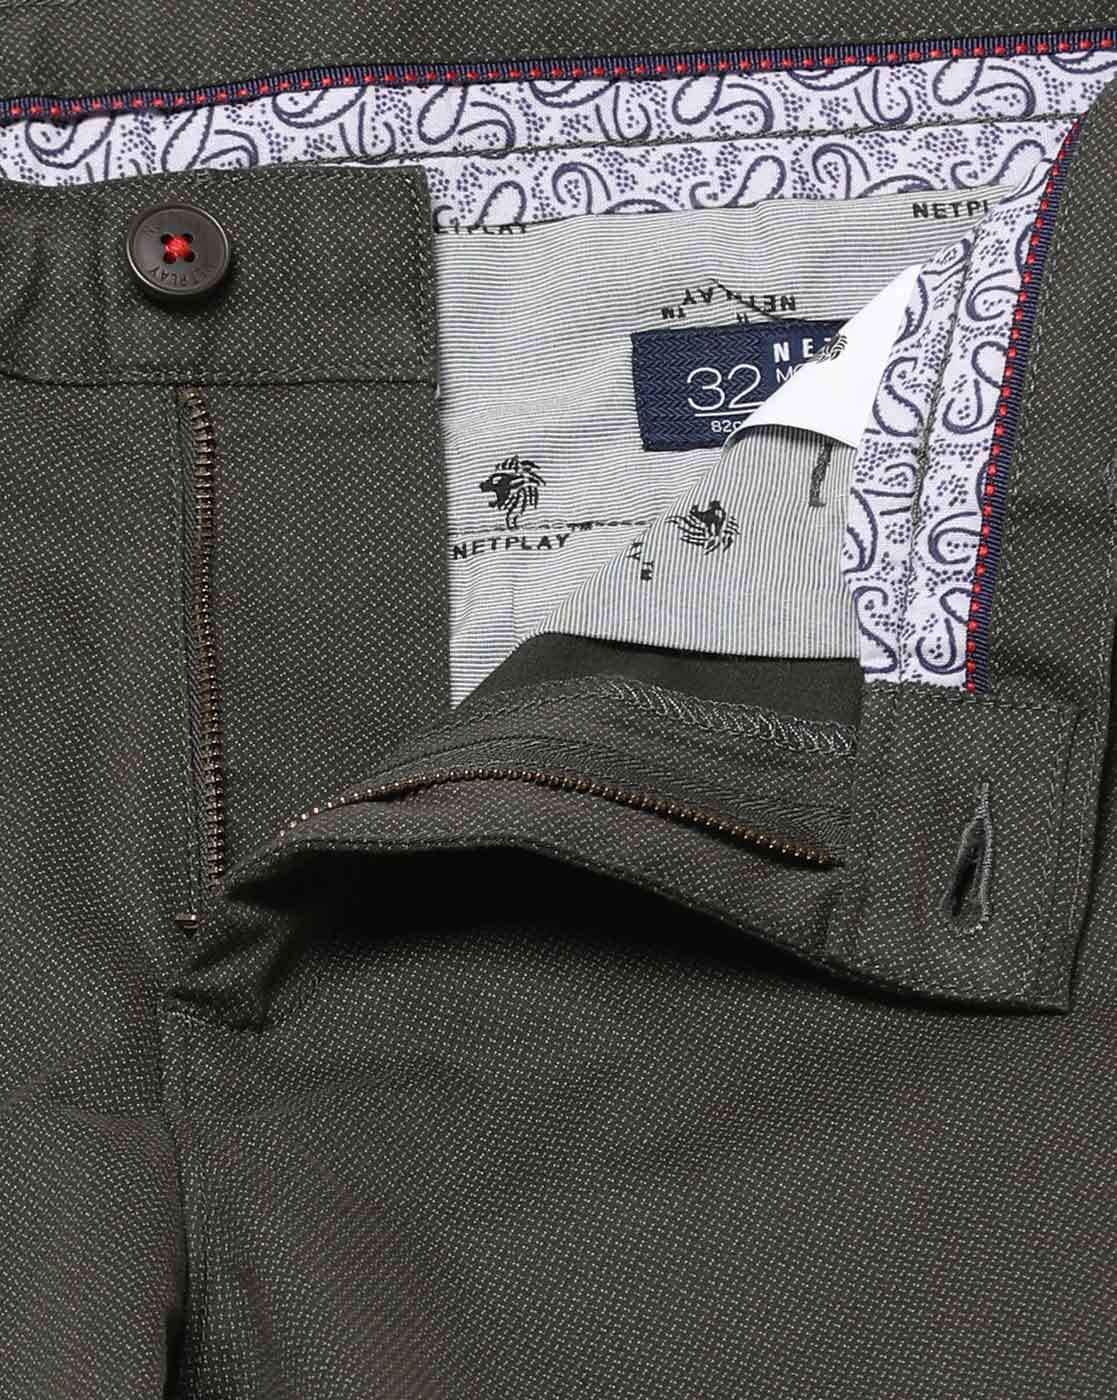 Buy Tapered Fit Corduroy Trousers Online at Best Prices in India - JioMart.